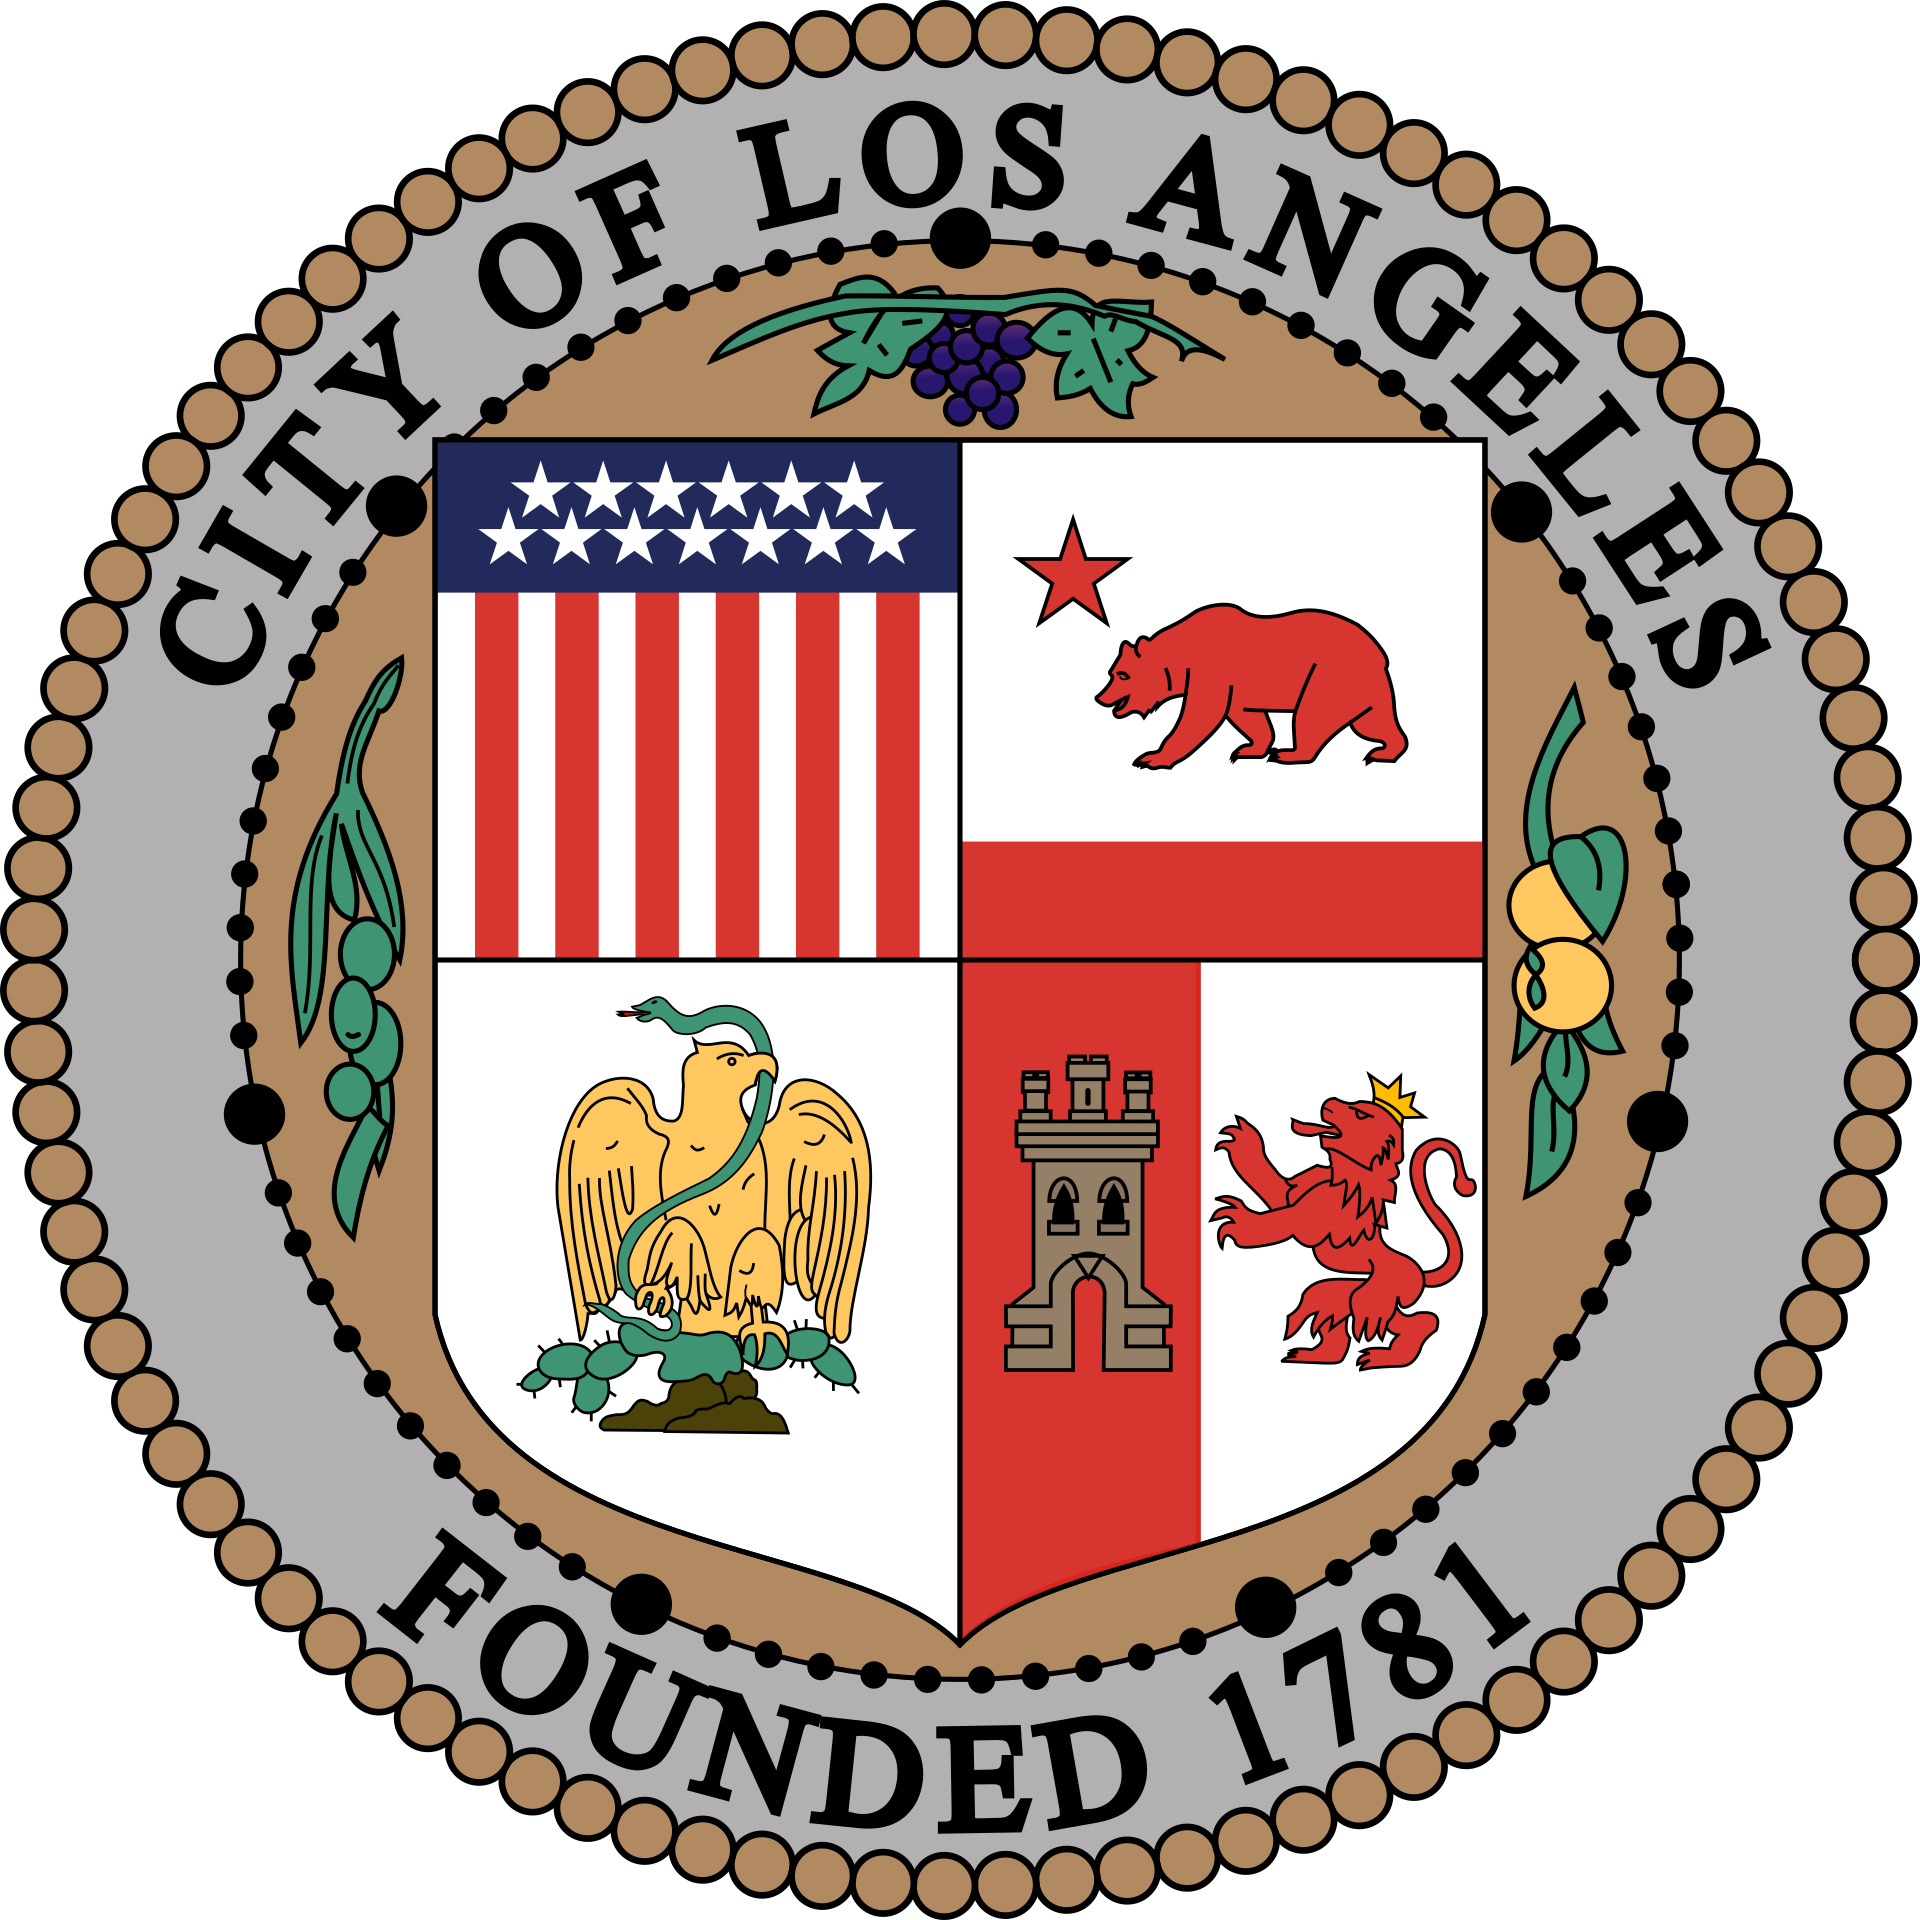 1920px-Seal_of_Los_Angeles.svg.png